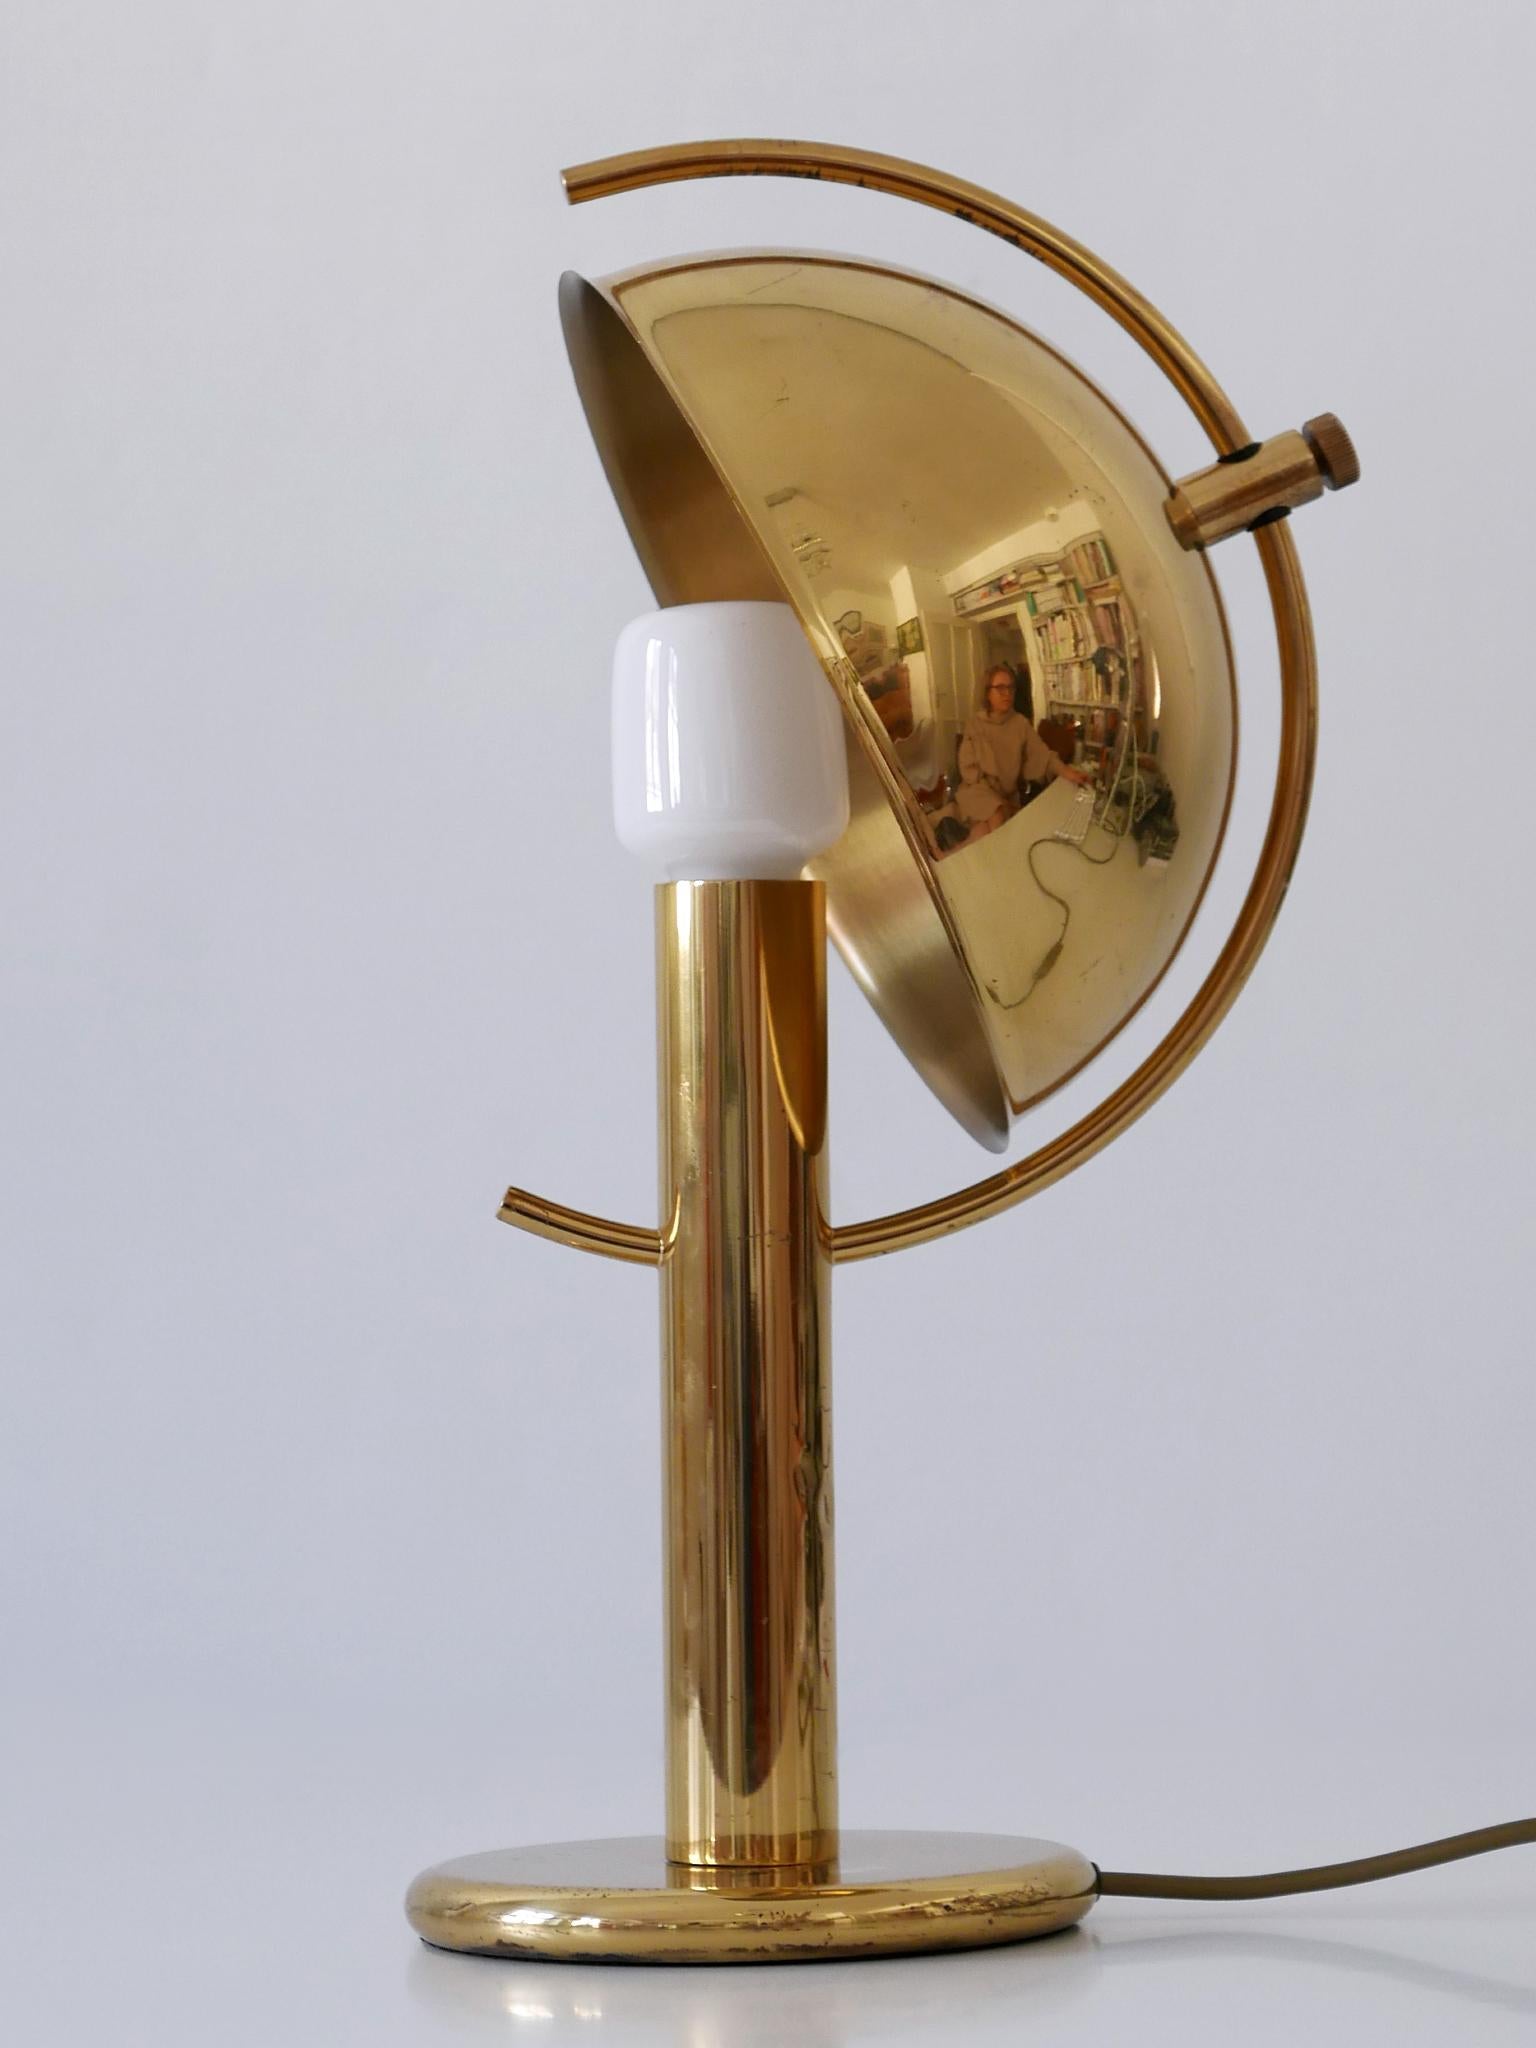 Polished Exceptional Mid-Century Modern Brass Table Lamp by Gebrüder Cosack Germany 1960s For Sale